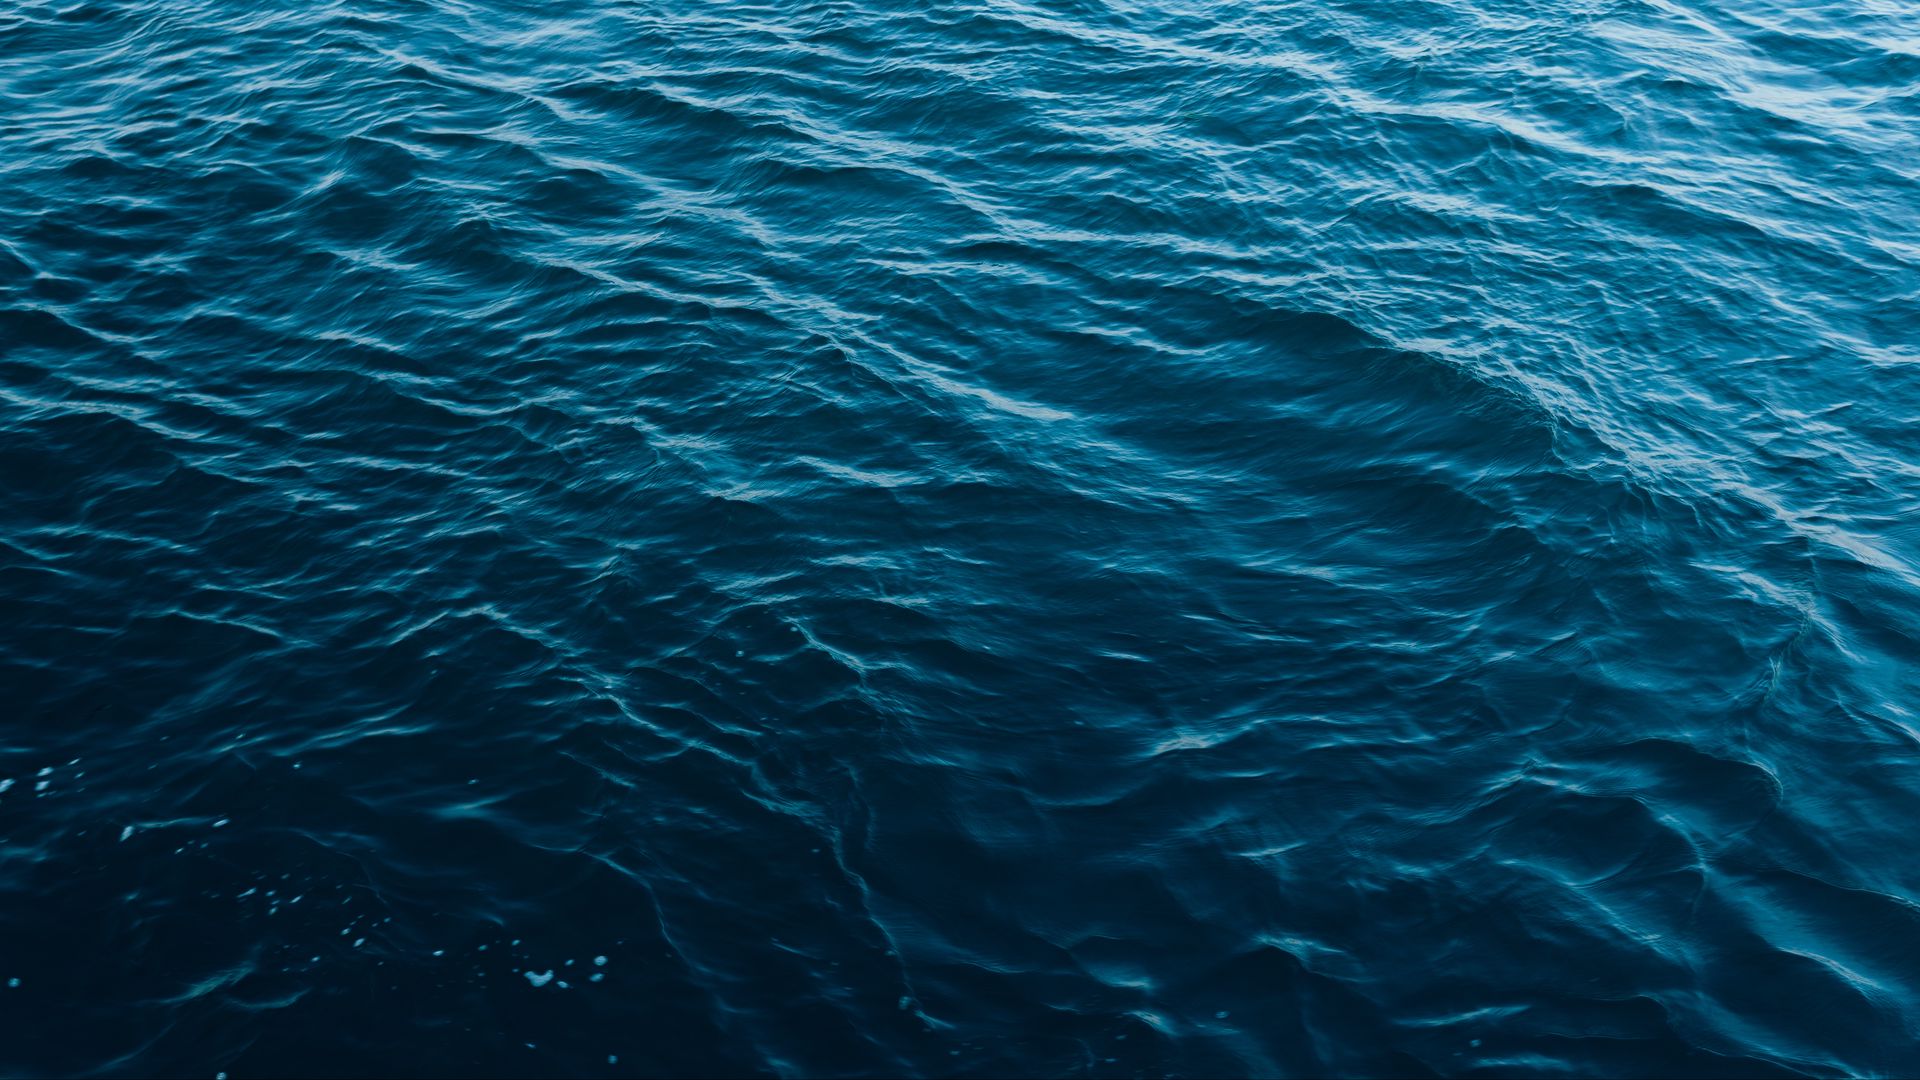 Download wallpaper 1920x1080 water, sea, ripples, surface, waves full ...